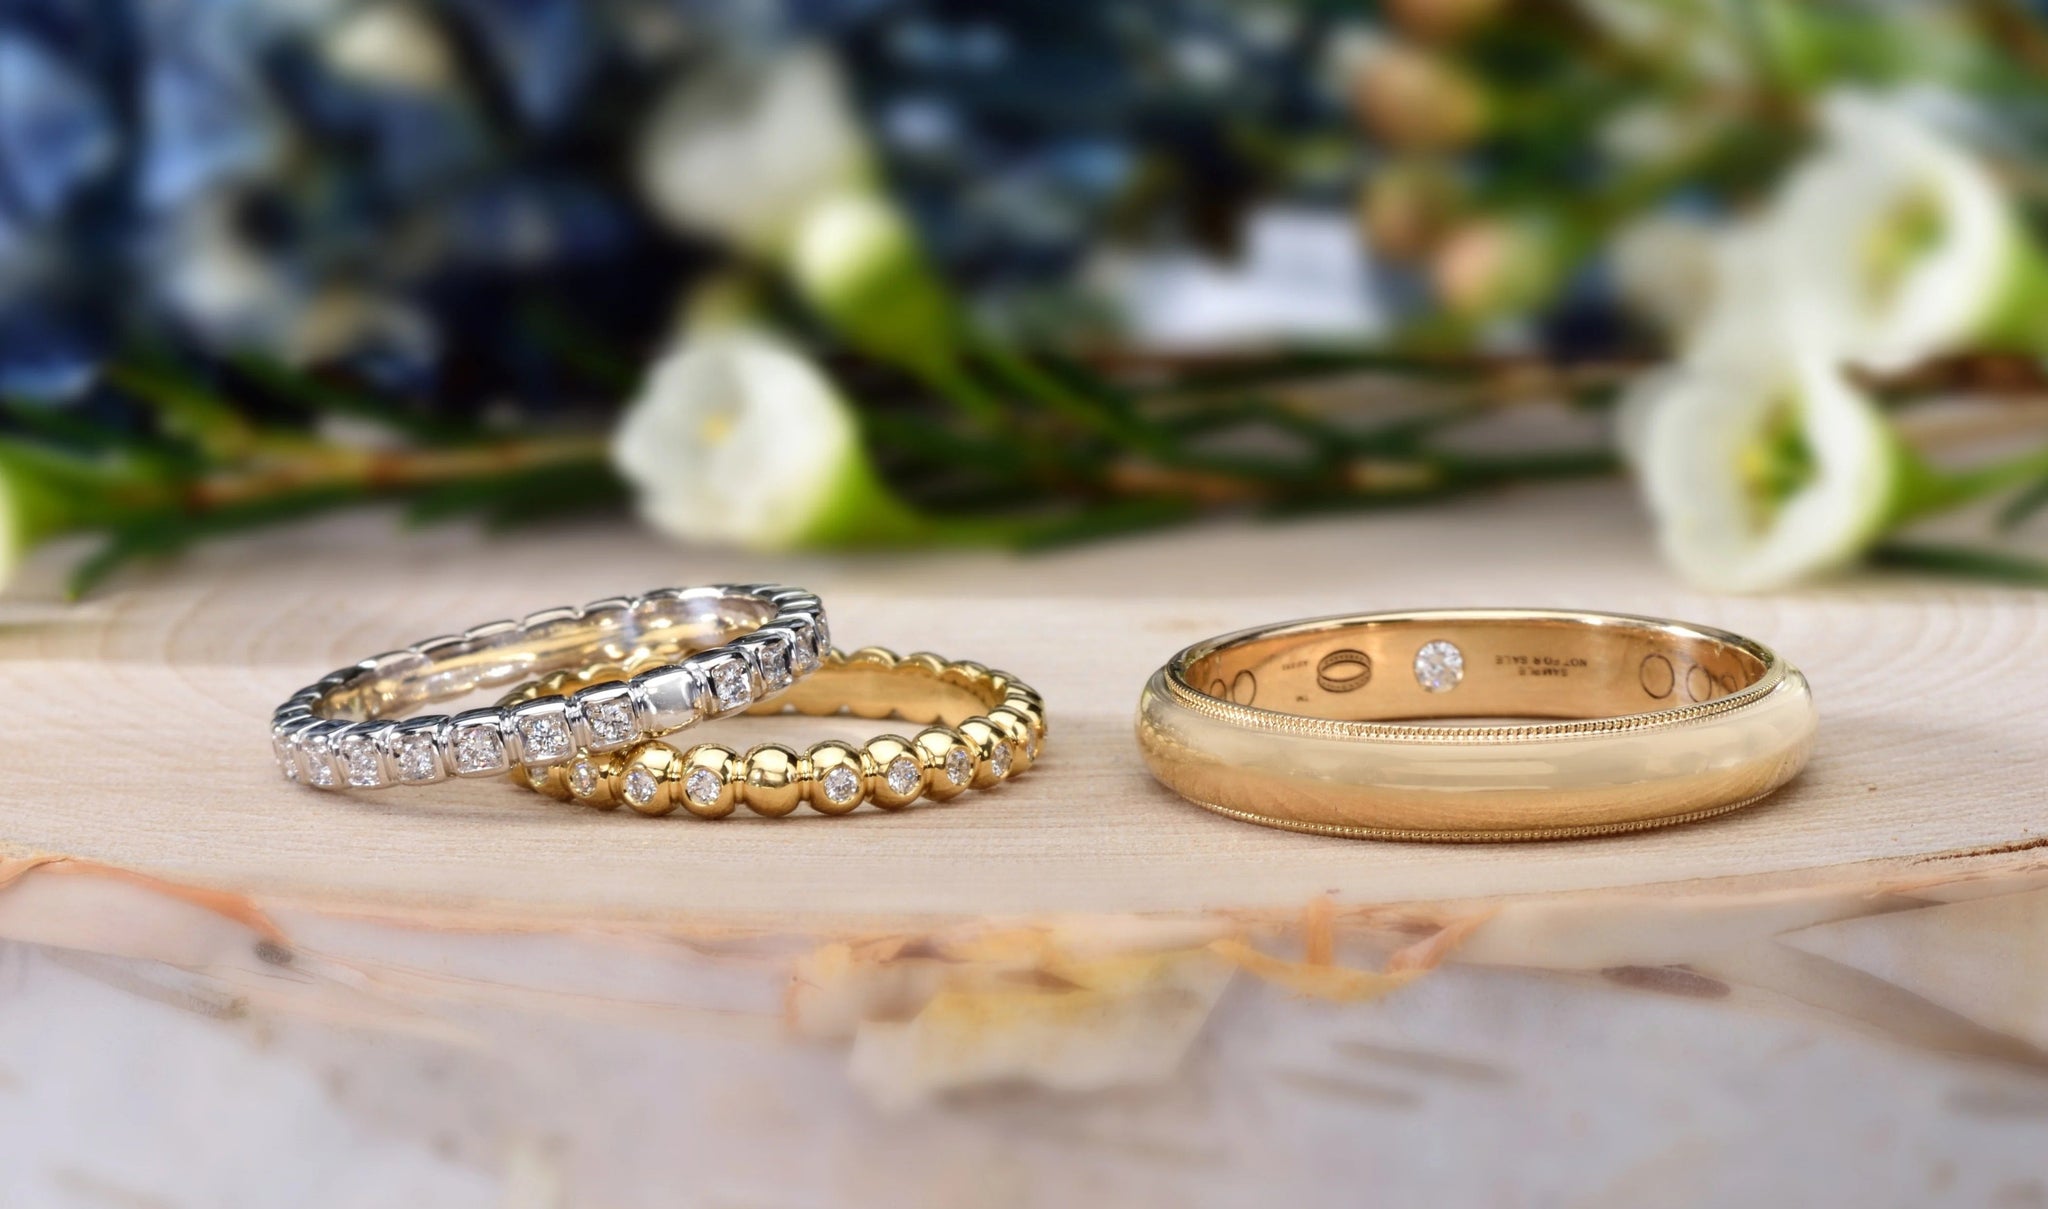 What Is The Average Price Of A Wedding Band?